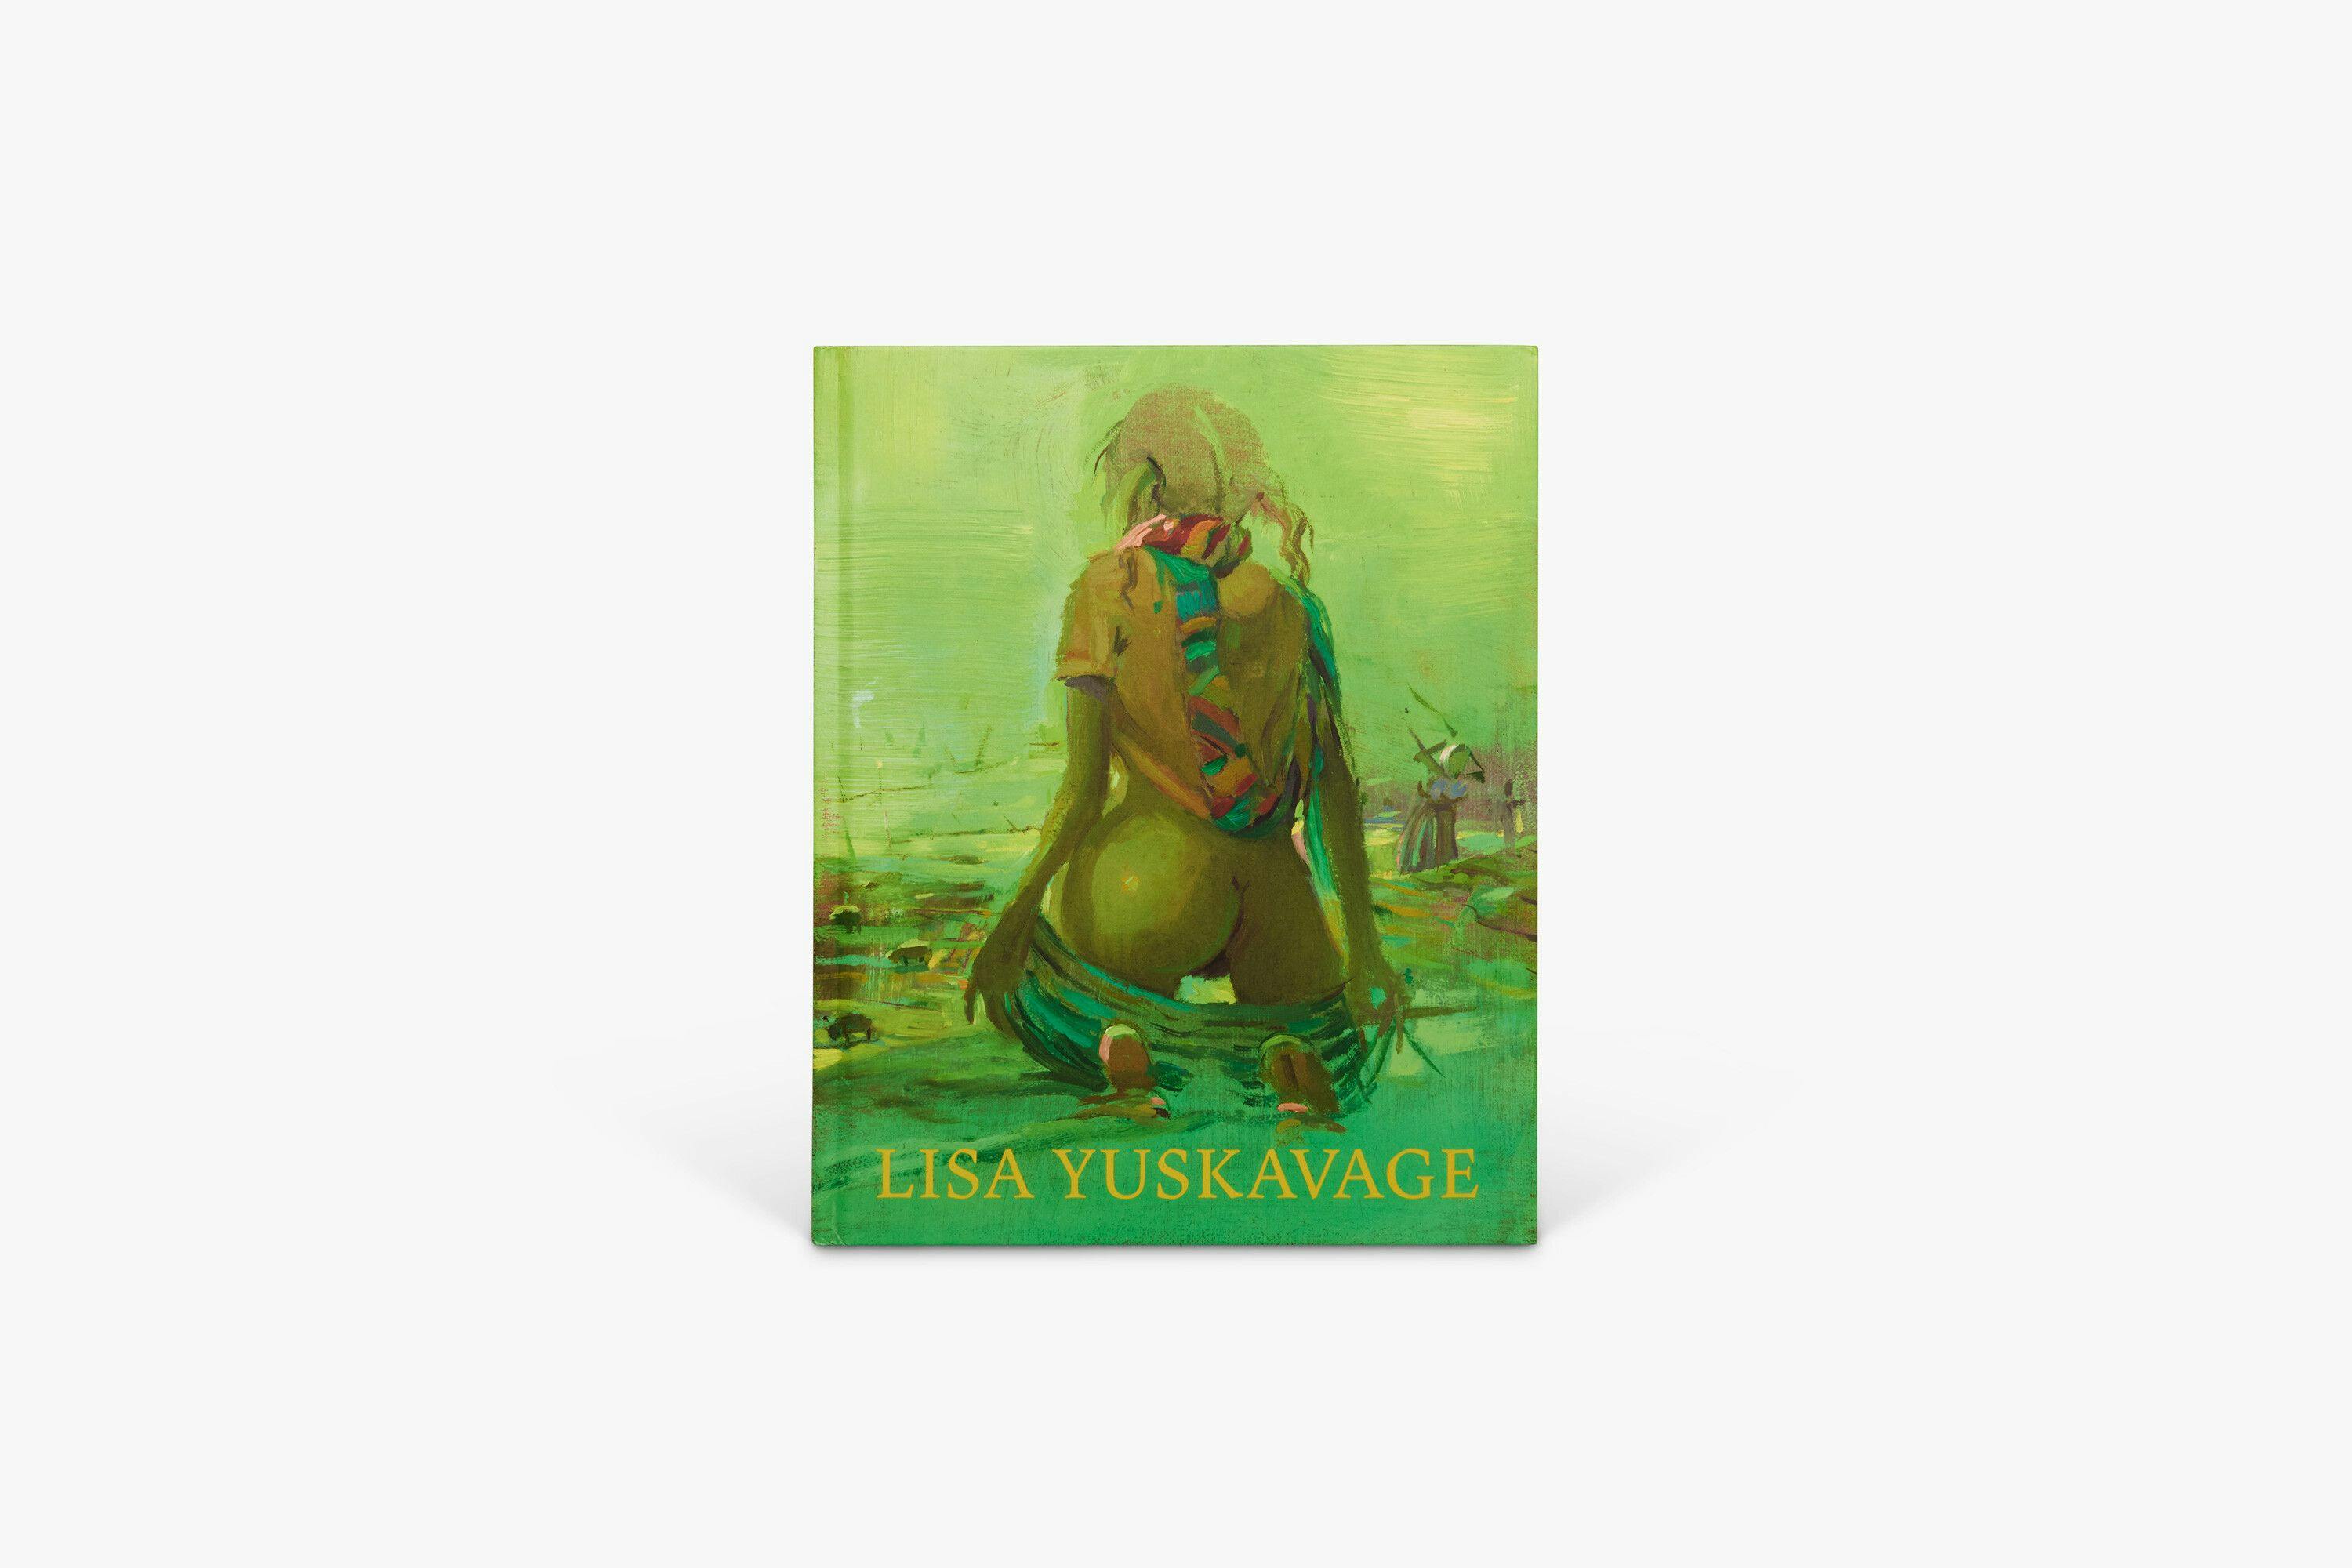 Cover of a book titled Lisa Yuskavage: Babie Brood, published by David Zwirner Books in 2019.